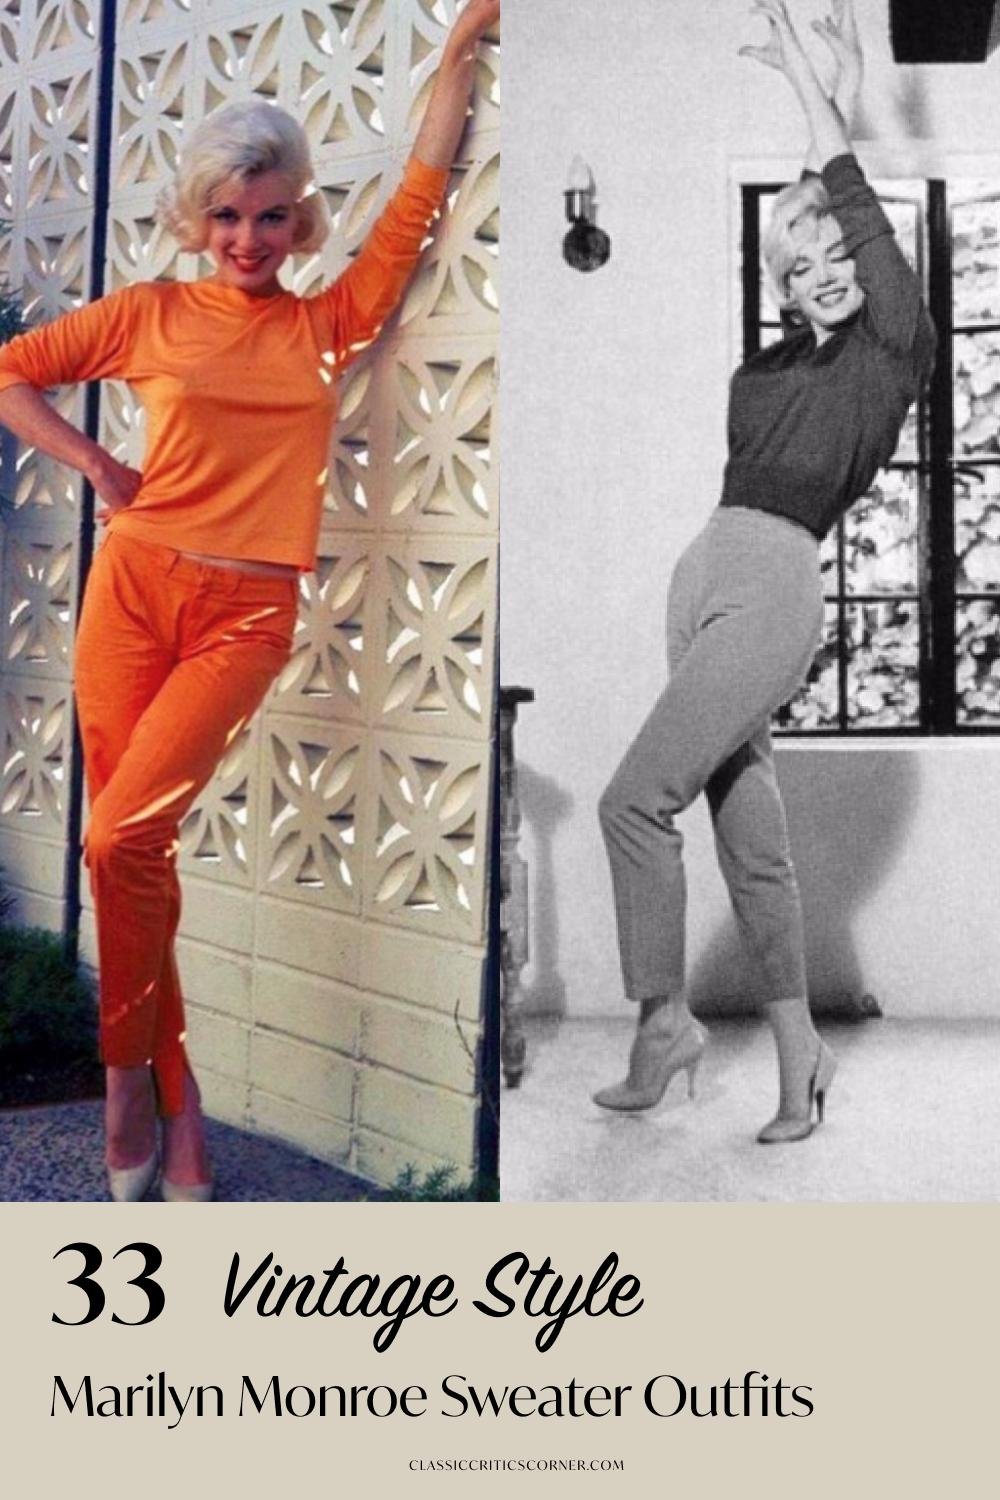 60s Vintage Retro Big Tits - 33 Bombshell Marilyn Monroe Sweater Outfits from the 1940s - 1960s â€”  Classic Critics Corner - Vintage 1940s, 1950s, 1960s